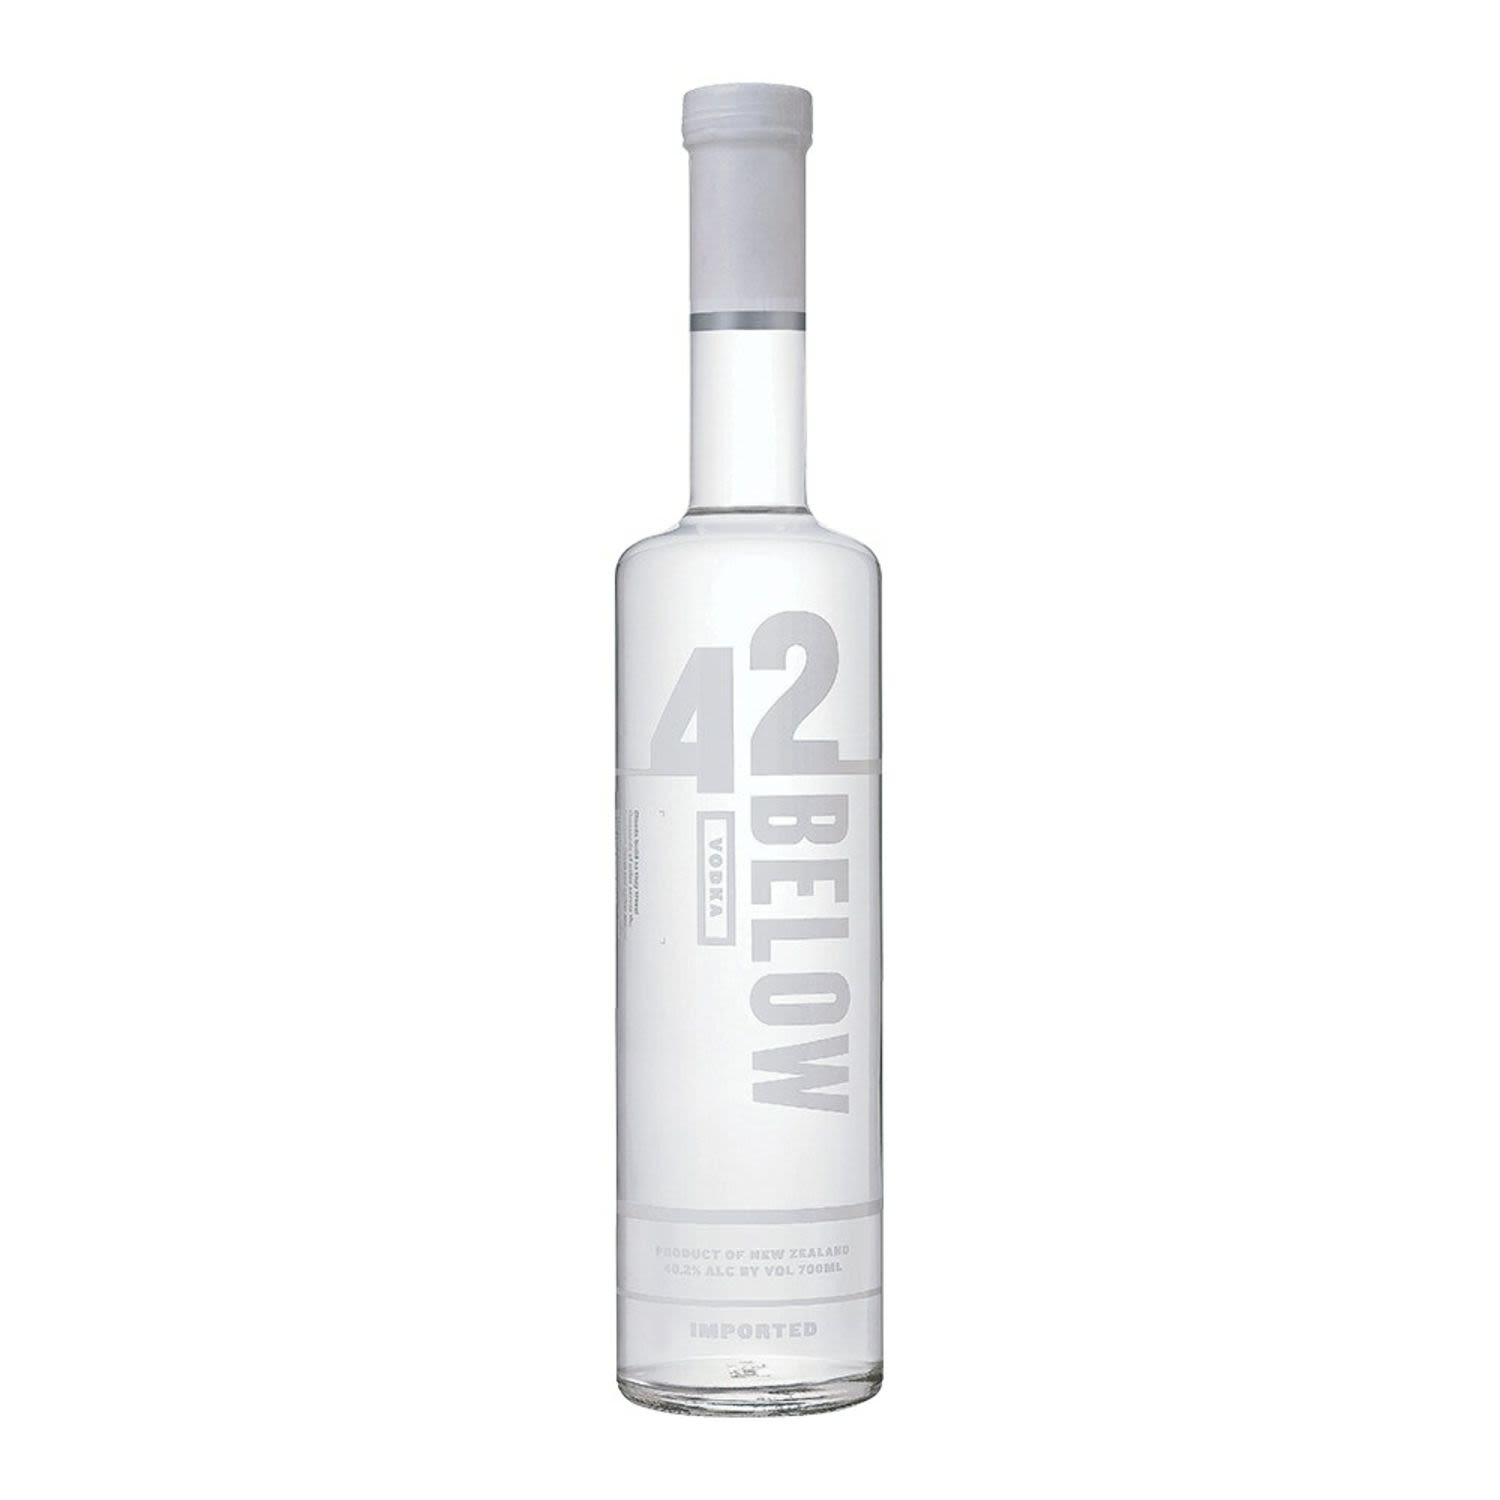 42 Below Vodka is made from premium NZ grain & pure, fresh spring water. This is 4 times distilled to ensure the finished vodka remains pure, smooth & elegant.. That's exactly what it is; A superbly smooth Vodka that is best served chilled or as a base for your favourite cocktail.<br /> <br />Alcohol Volume: 40.00%<br /><br />Pack Format: Bottle<br /><br />Standard Drinks: 22.1</br /><br />Pack Type: Bottle<br /><br />Country of Origin: New Zealand<br />